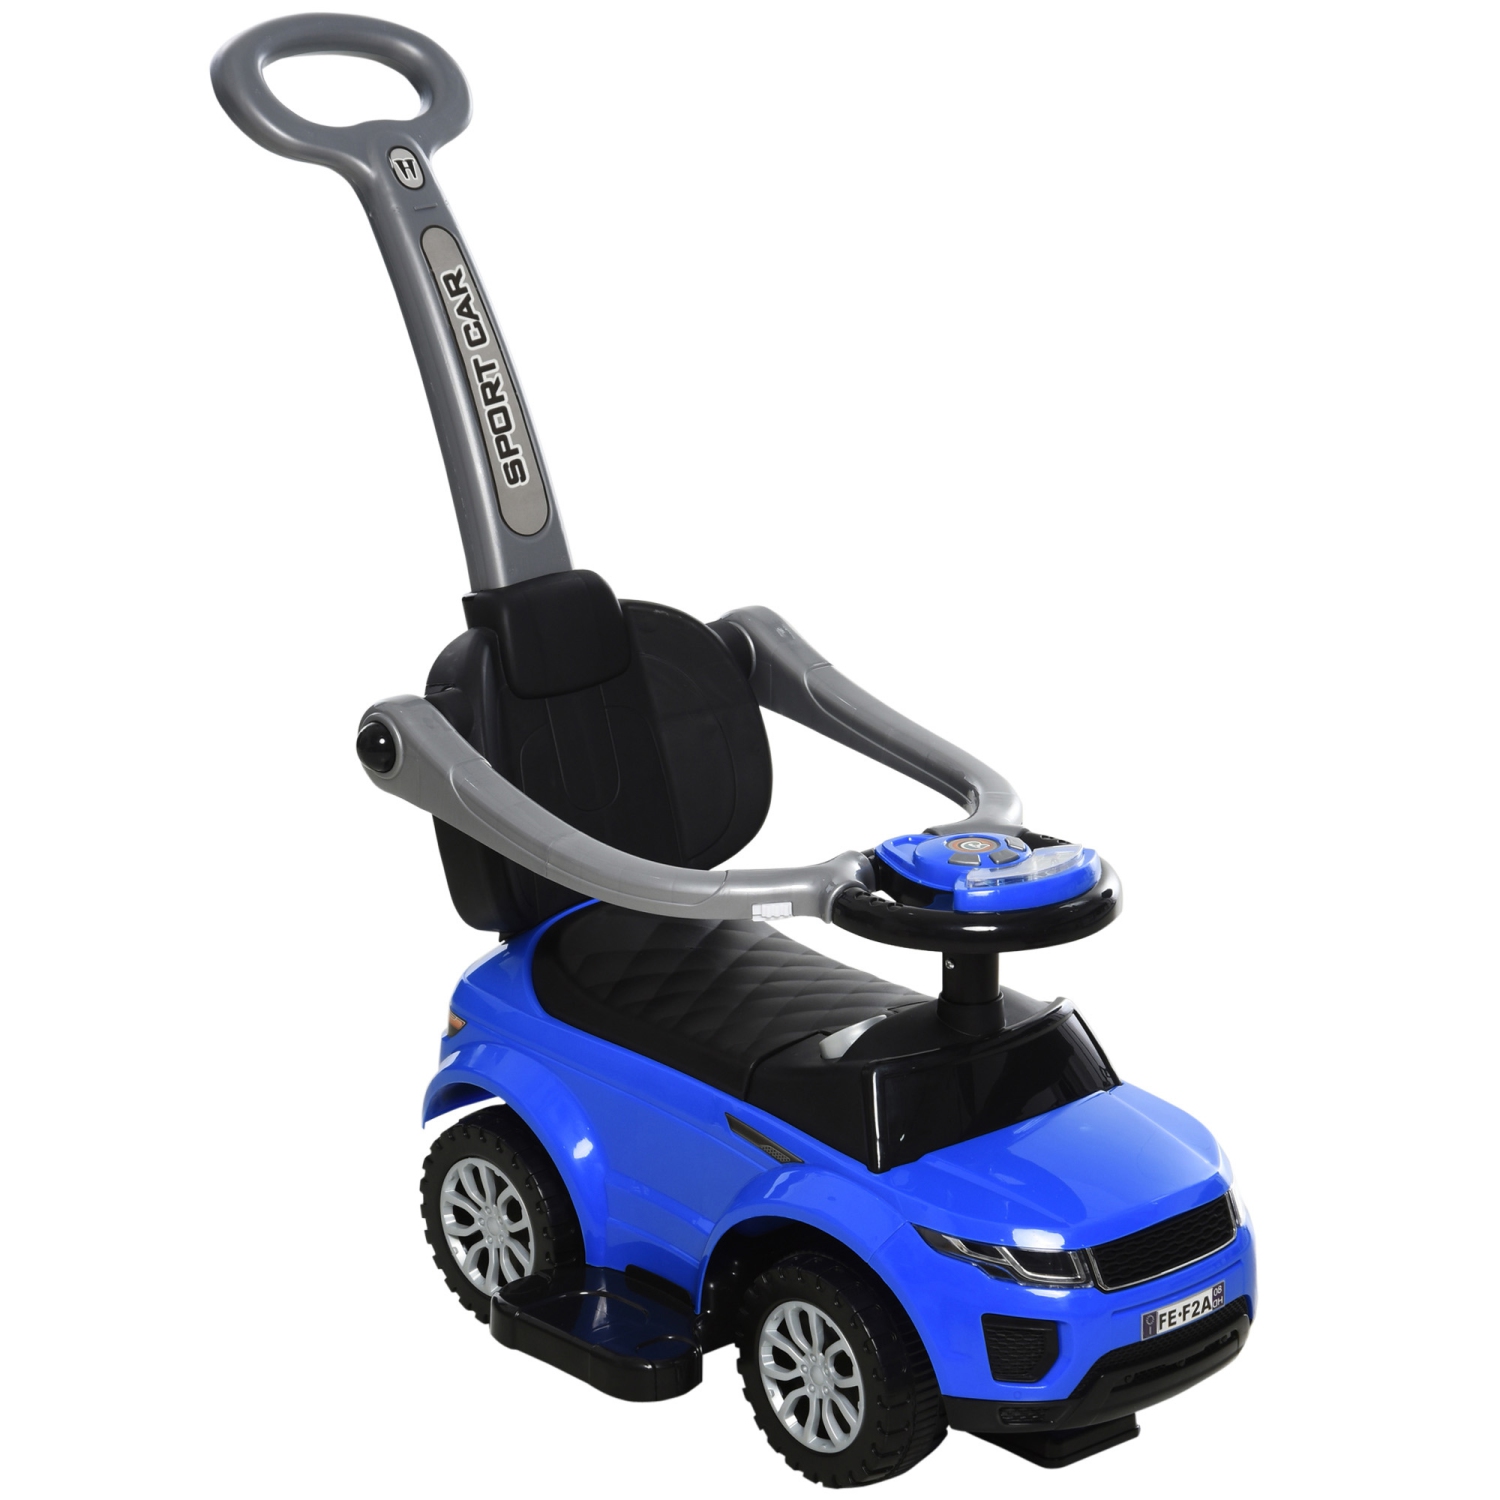 Aosom 3 In 1 Kid Ride on Push Car Stroller Sliding Walking Car with Horn Music Light Function Secure Bar Ride on Toy for Boy Girl Toddlers 1-3 Years Old Blue